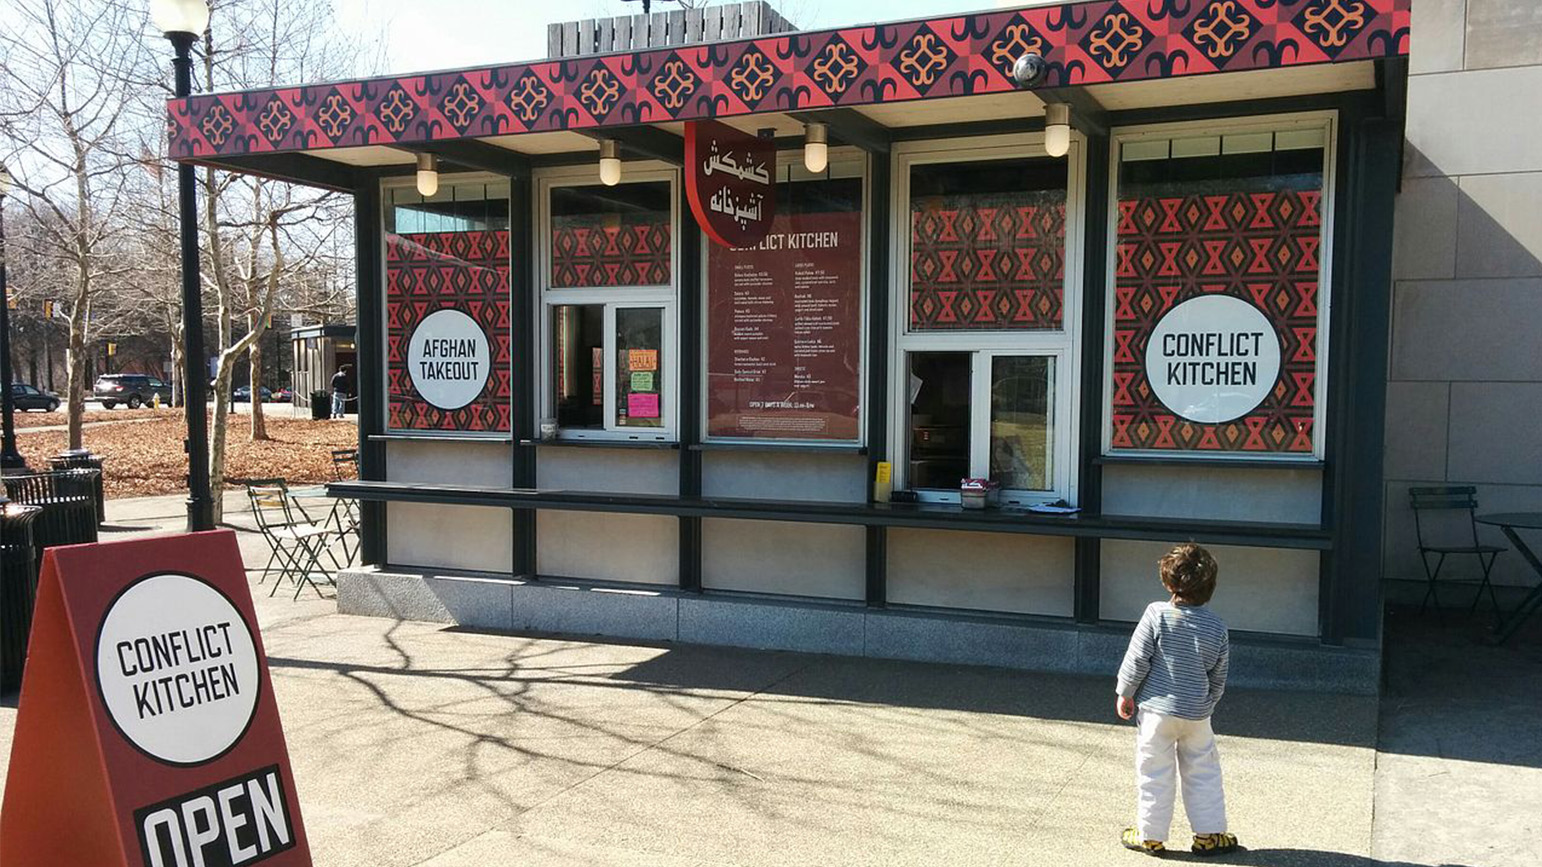 Photograph of Conflict Kitchen, a takeout kiosk decorated in with geometric patterning